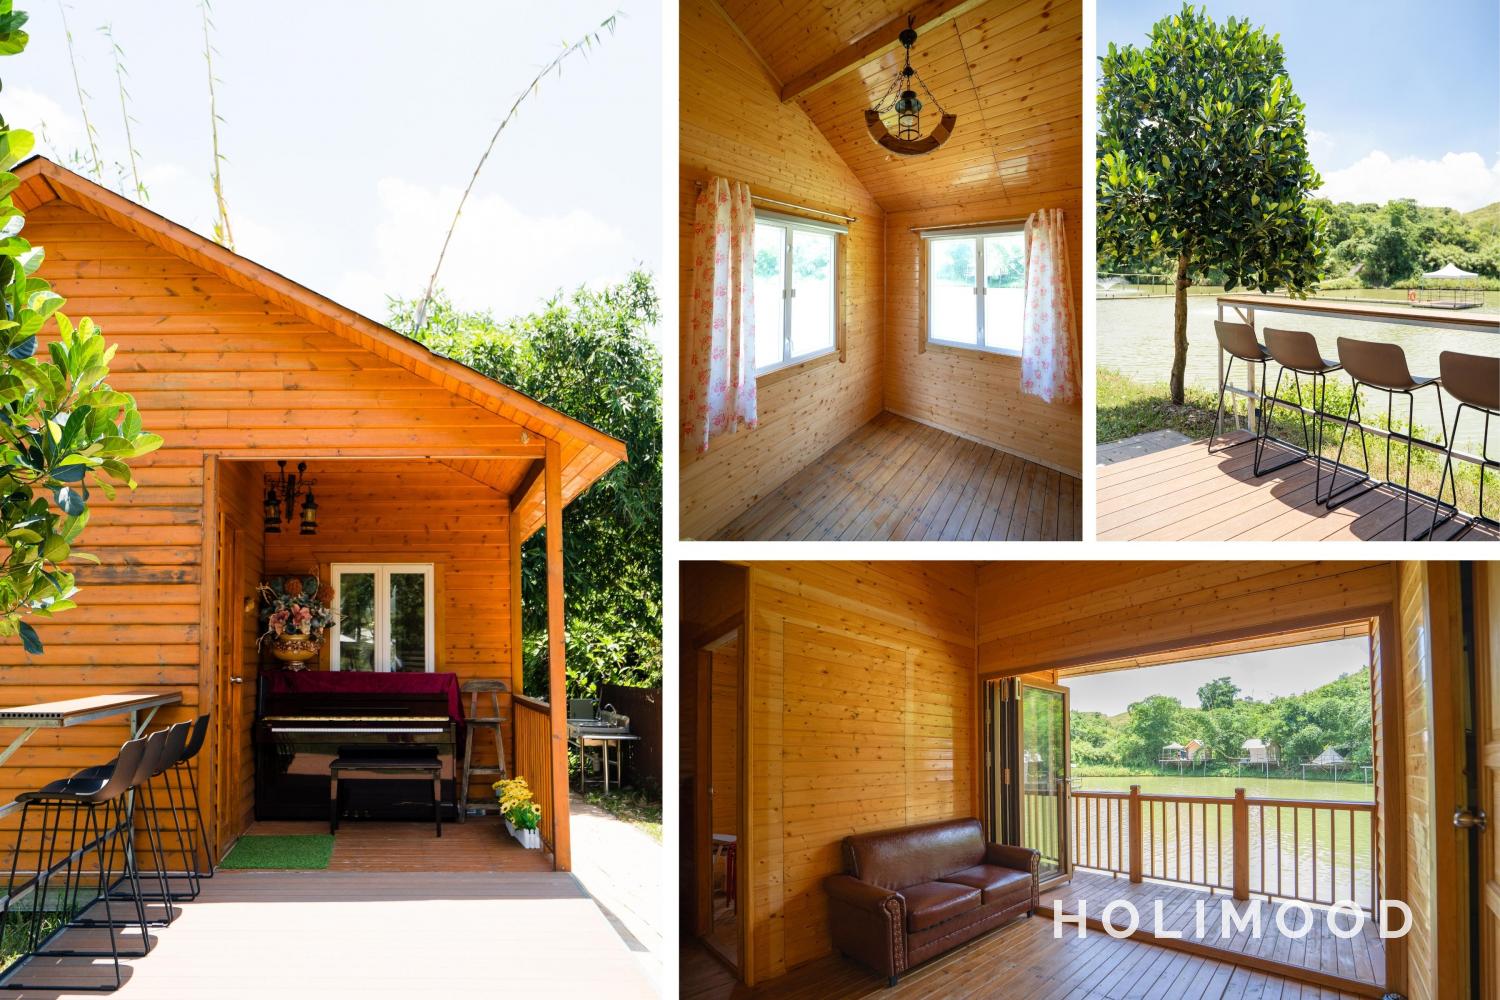 We Camp - Pool Side Camping & Glamping & BYOS & Car Camping 【Ideal option for partying】American-styled cabin activity base with air-conditioning (10 hours rental)（6-10 people） 1